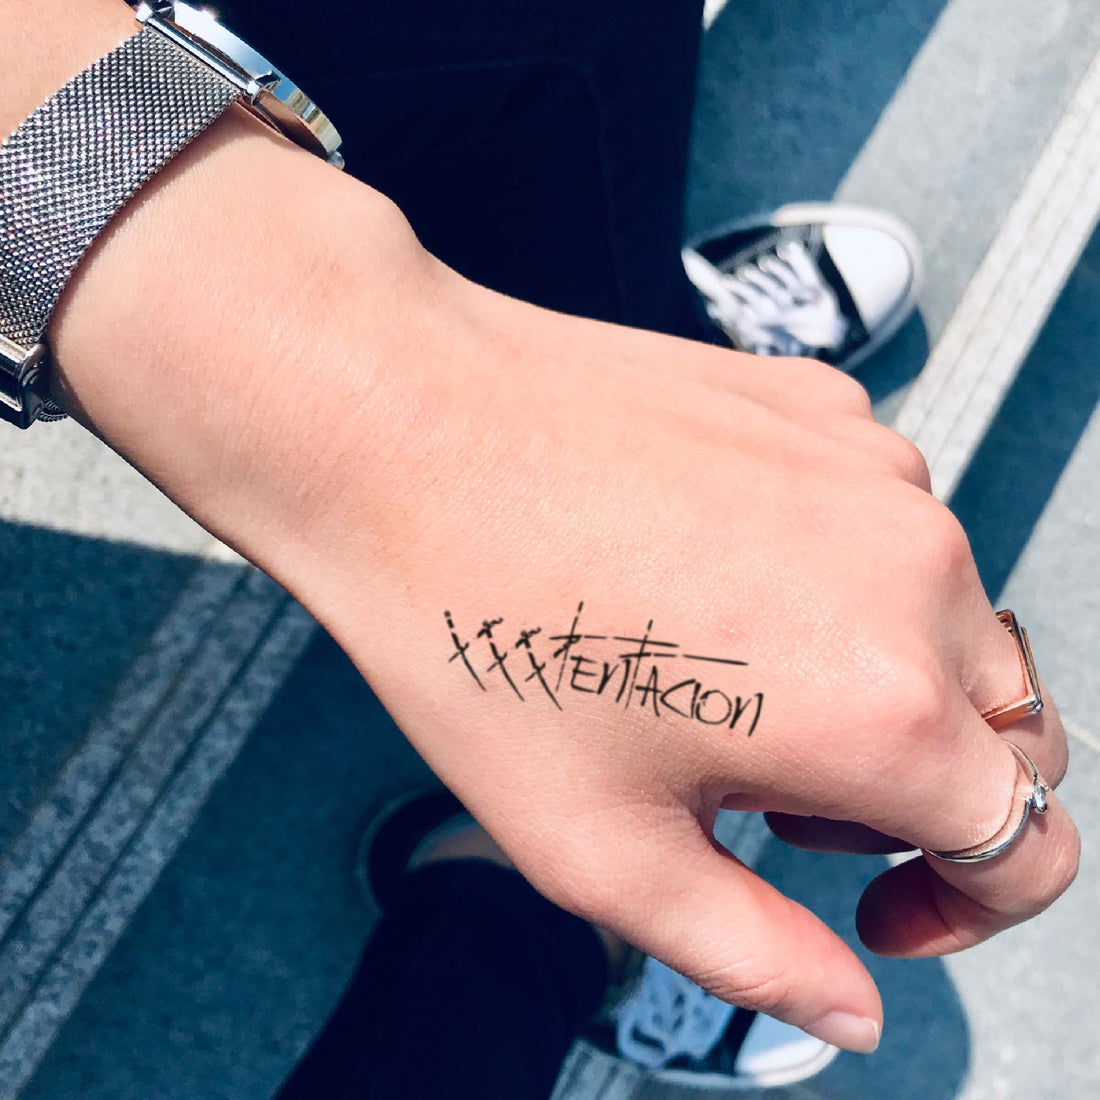 XXXTENTACION custom temporary tattoo sticker design idea inspiration meanings removal arm wrist hand words font name signature calligraphy lyrics tour concert outfits merch accessory gift souvenir costumes wear dress up code